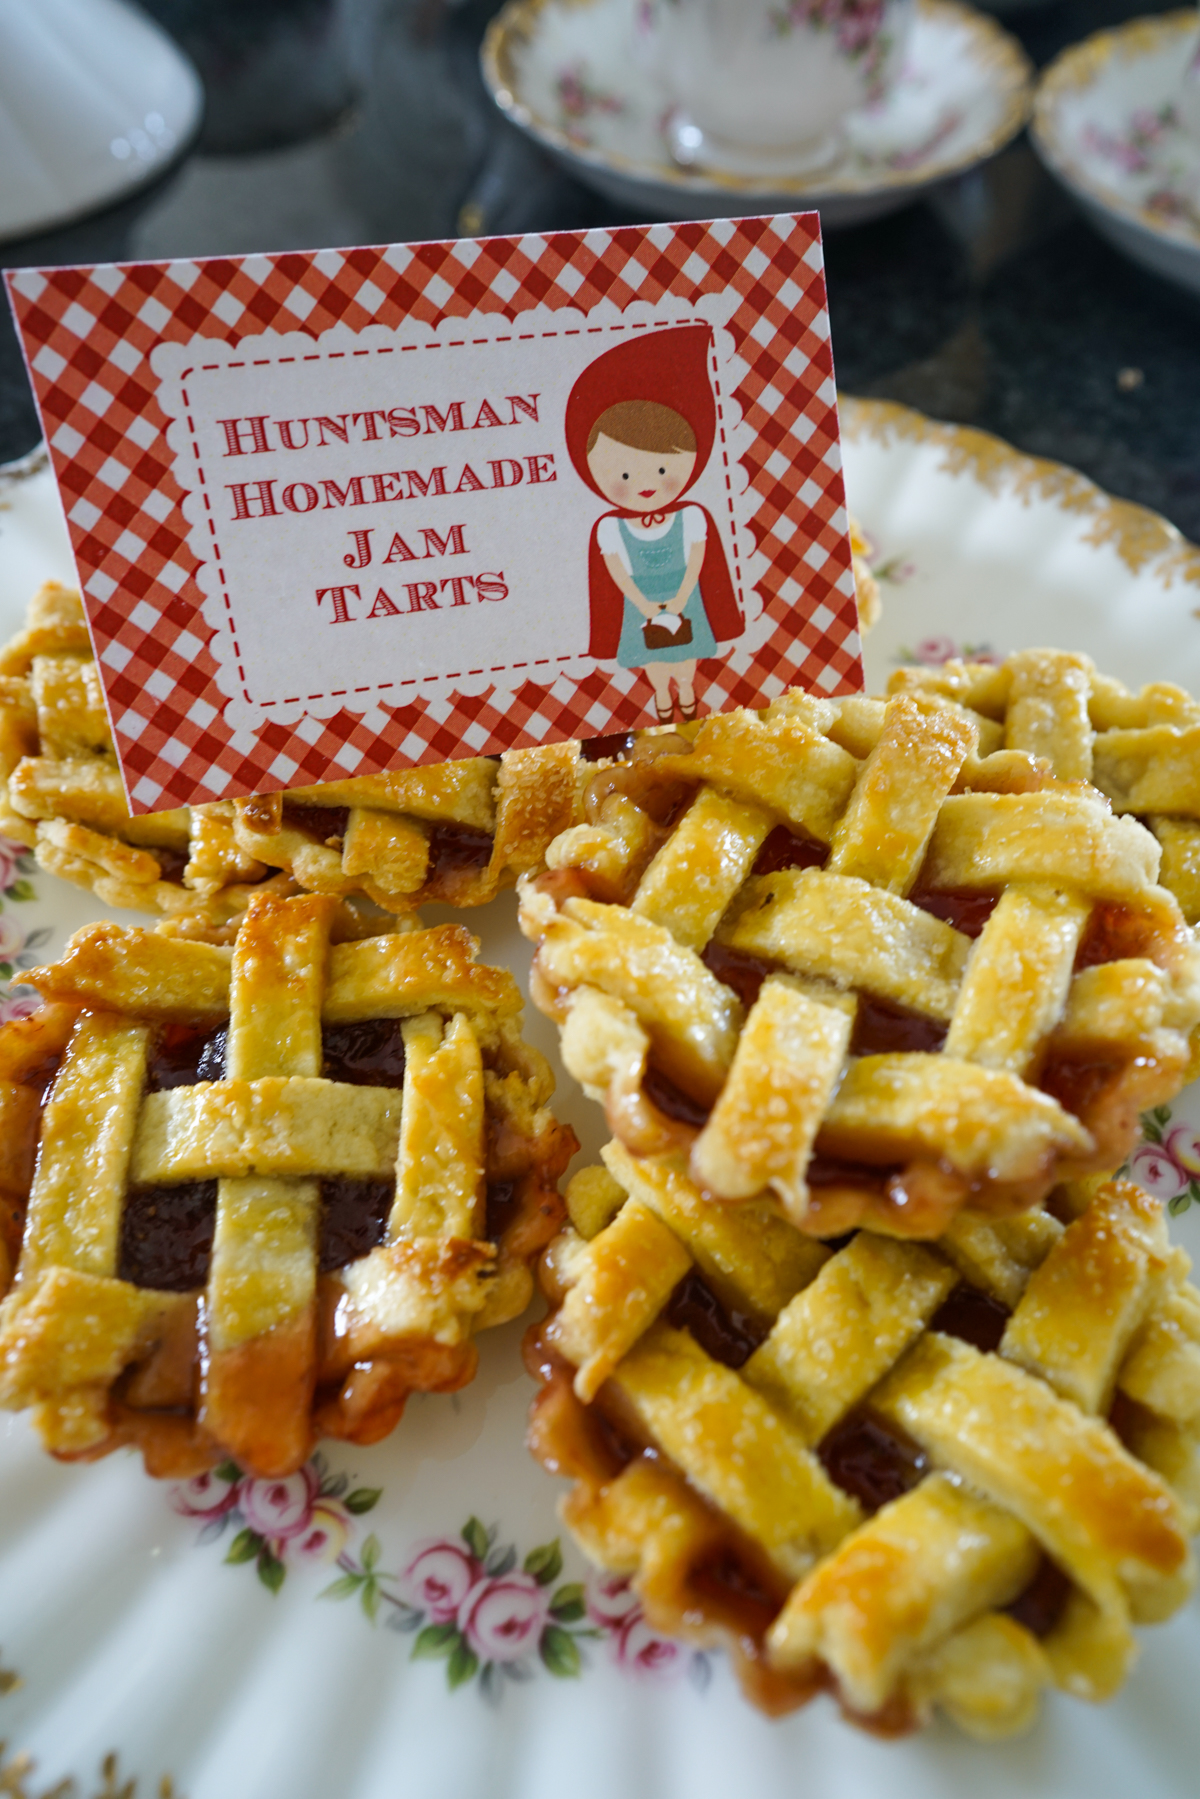 Little Red Riding Hood Party Food Ideas of Jam Tarts with lattice pastry design on top